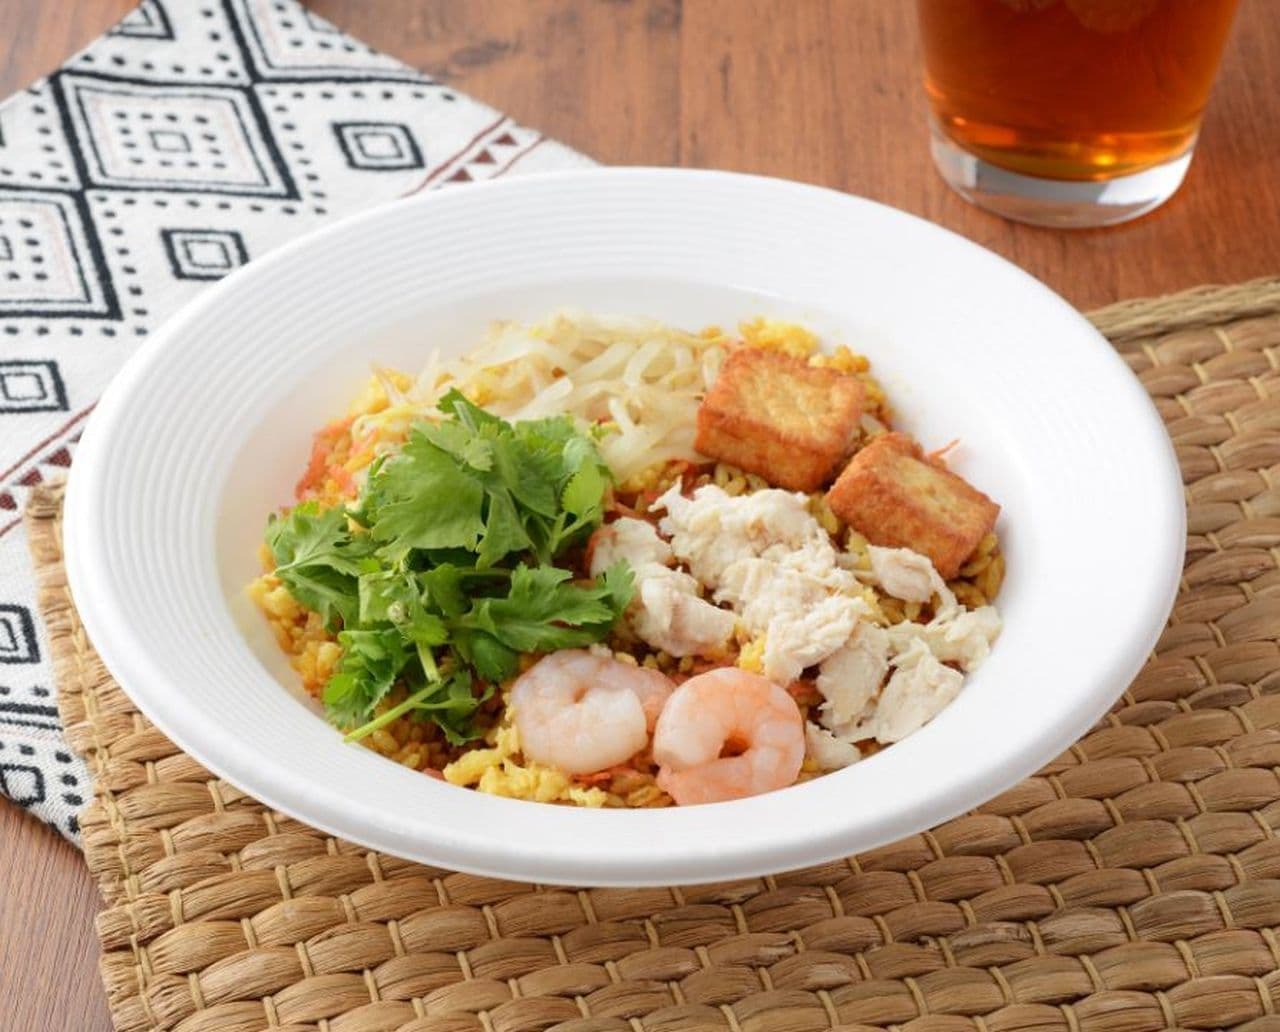 Natural Lawson "Laksa-style fried rice with five-grain rice"